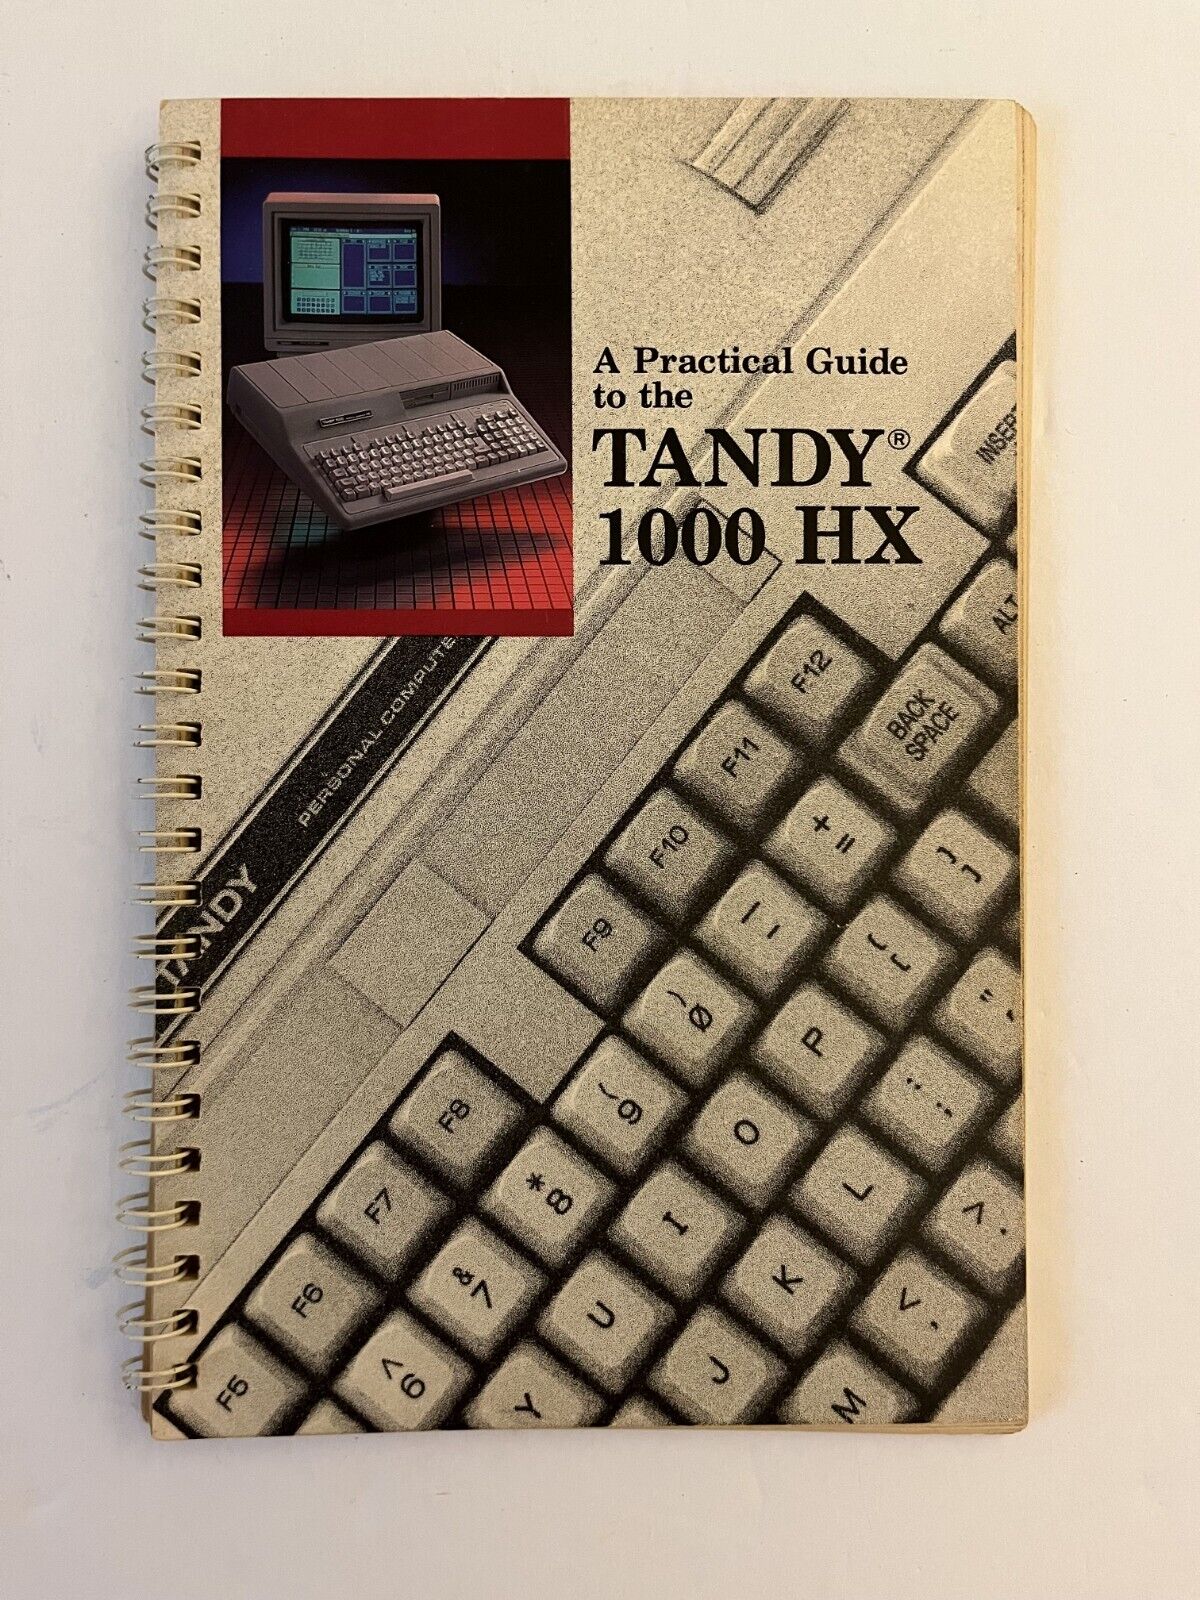 Practical Guide to the Tandy 1000 HX Vintage Radio Shack Manual